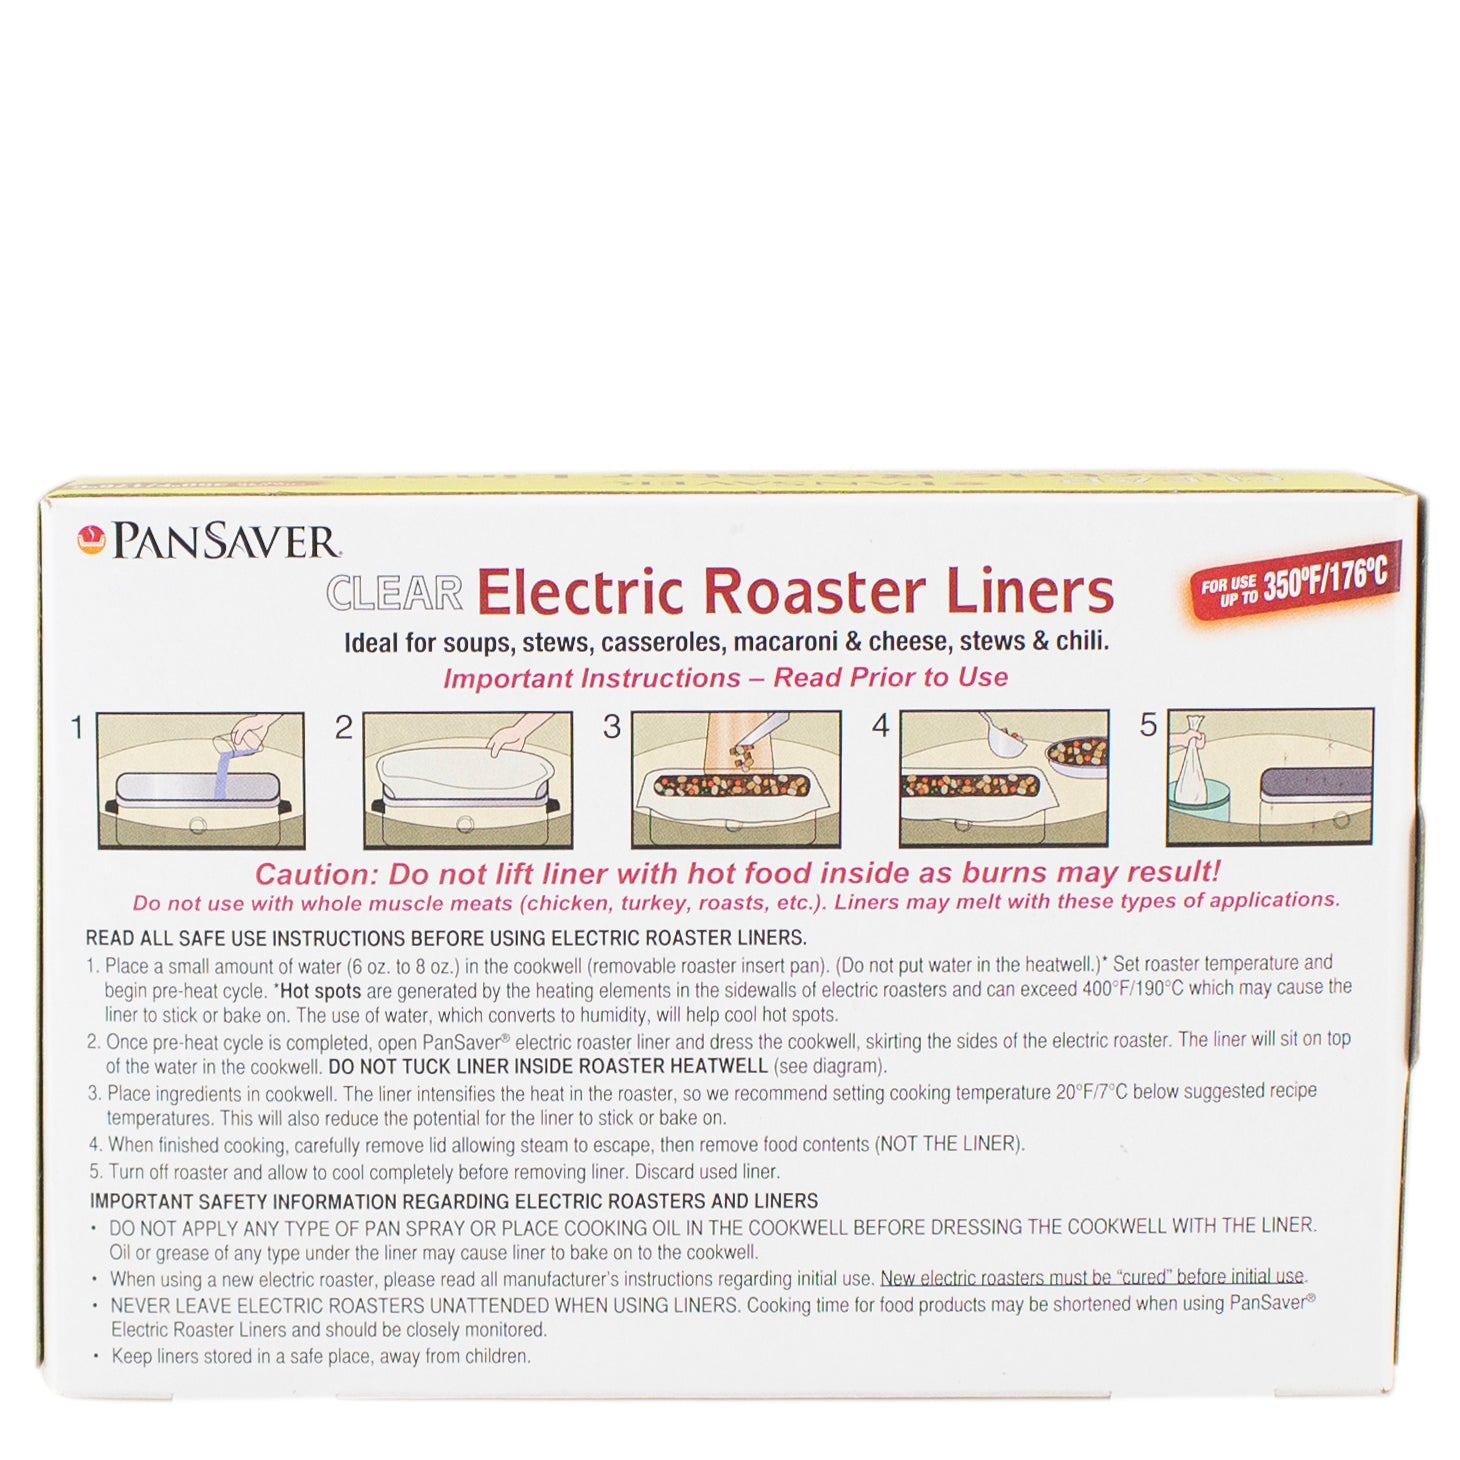 PanSaver Clear Electric Roaster Liners 2-count 42120 – Good's